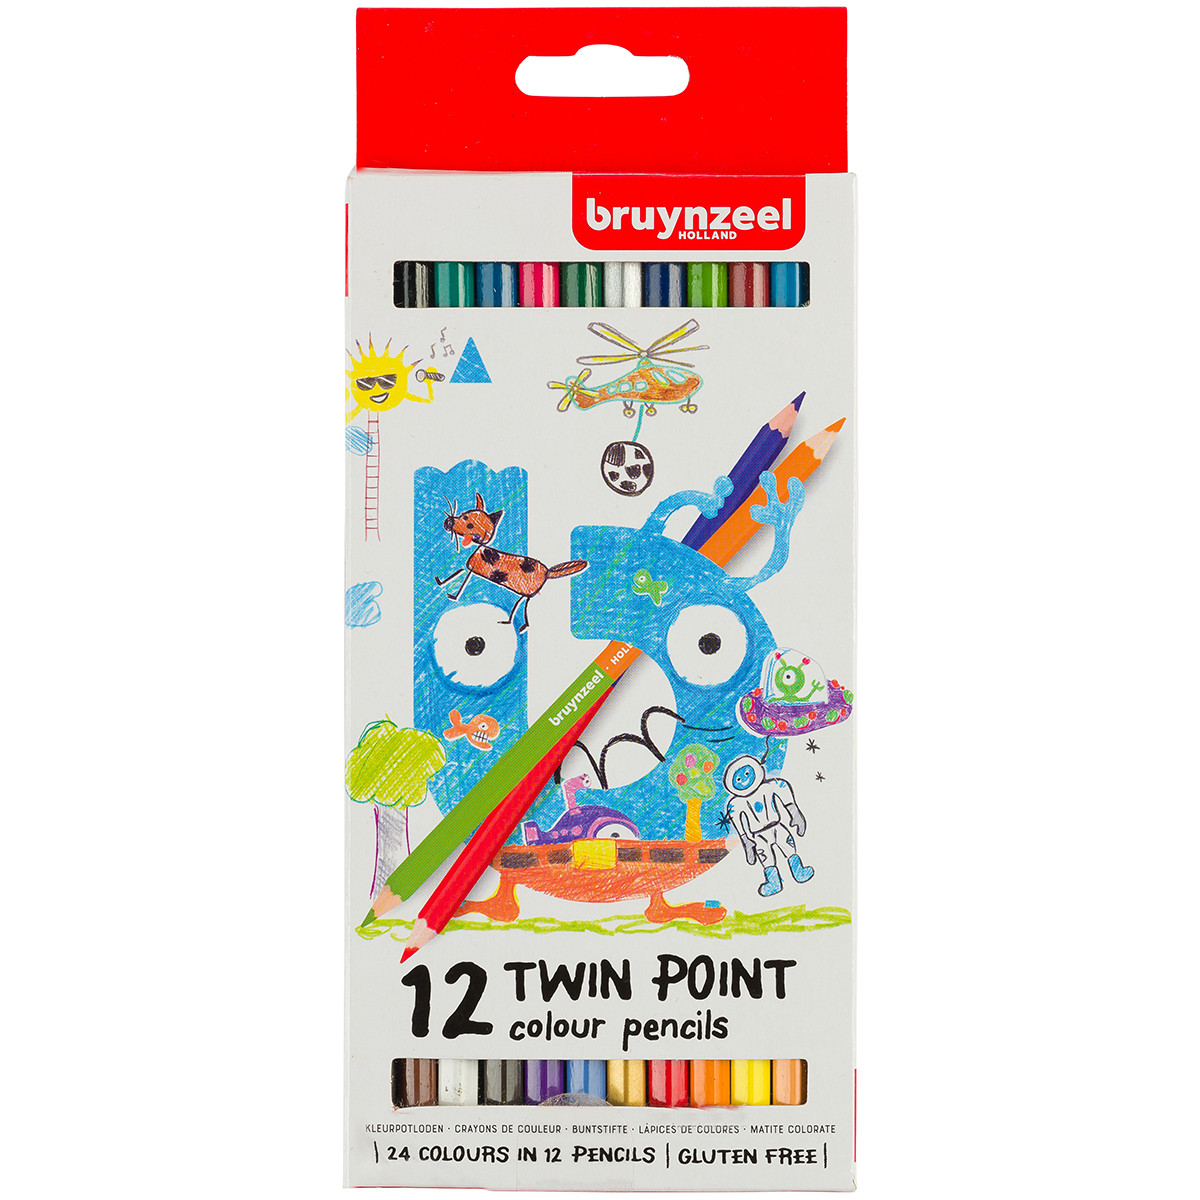 Bruynzeel Kids Twinpoint Colouring Pencils - Assorted Colours (Pack of 12)